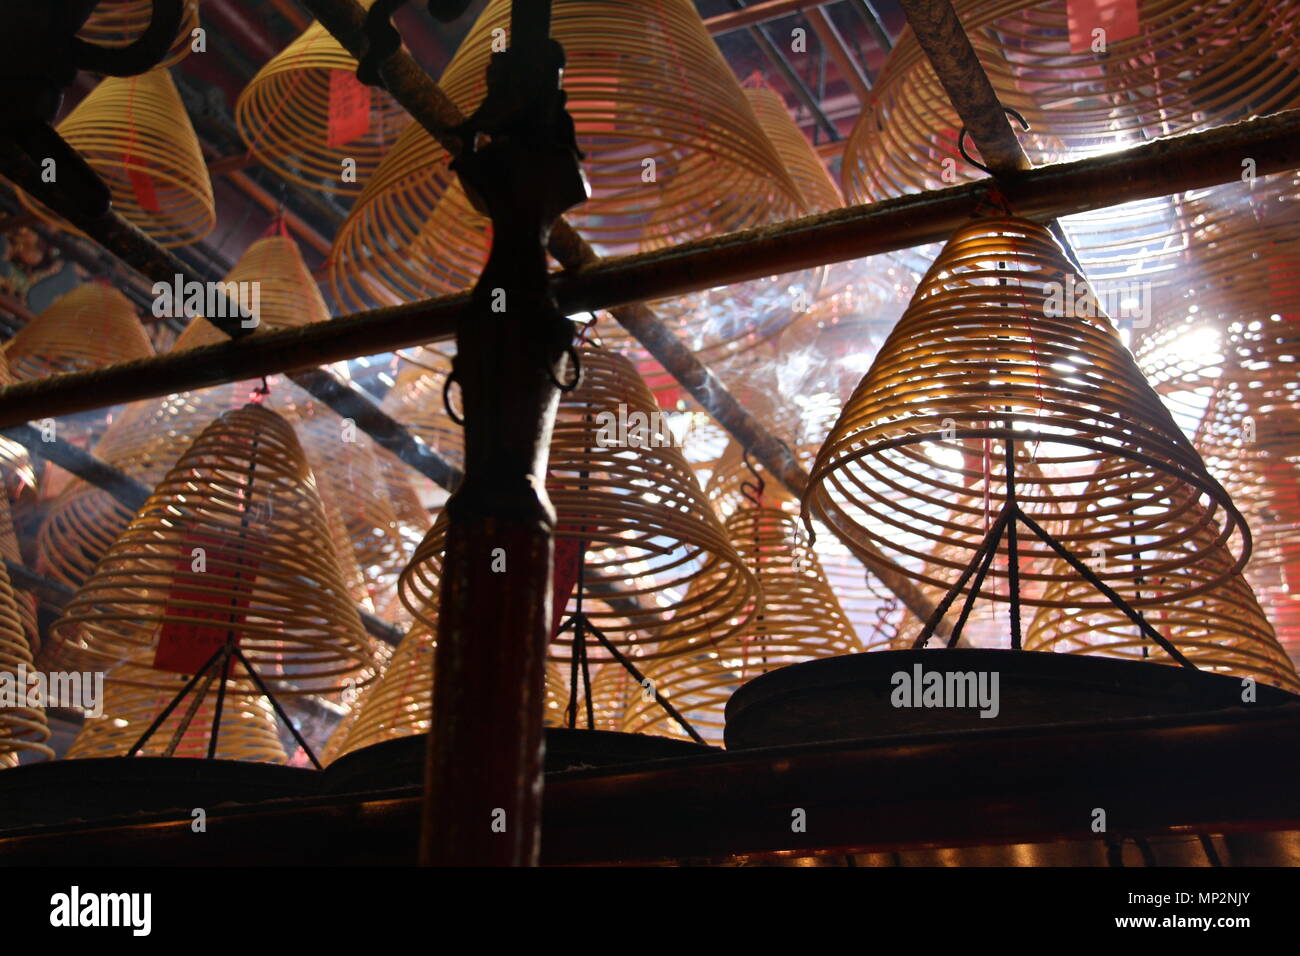 Incense coils smoke overhead at the Man Mo taoist temple in Hong Kong. Stock Photo